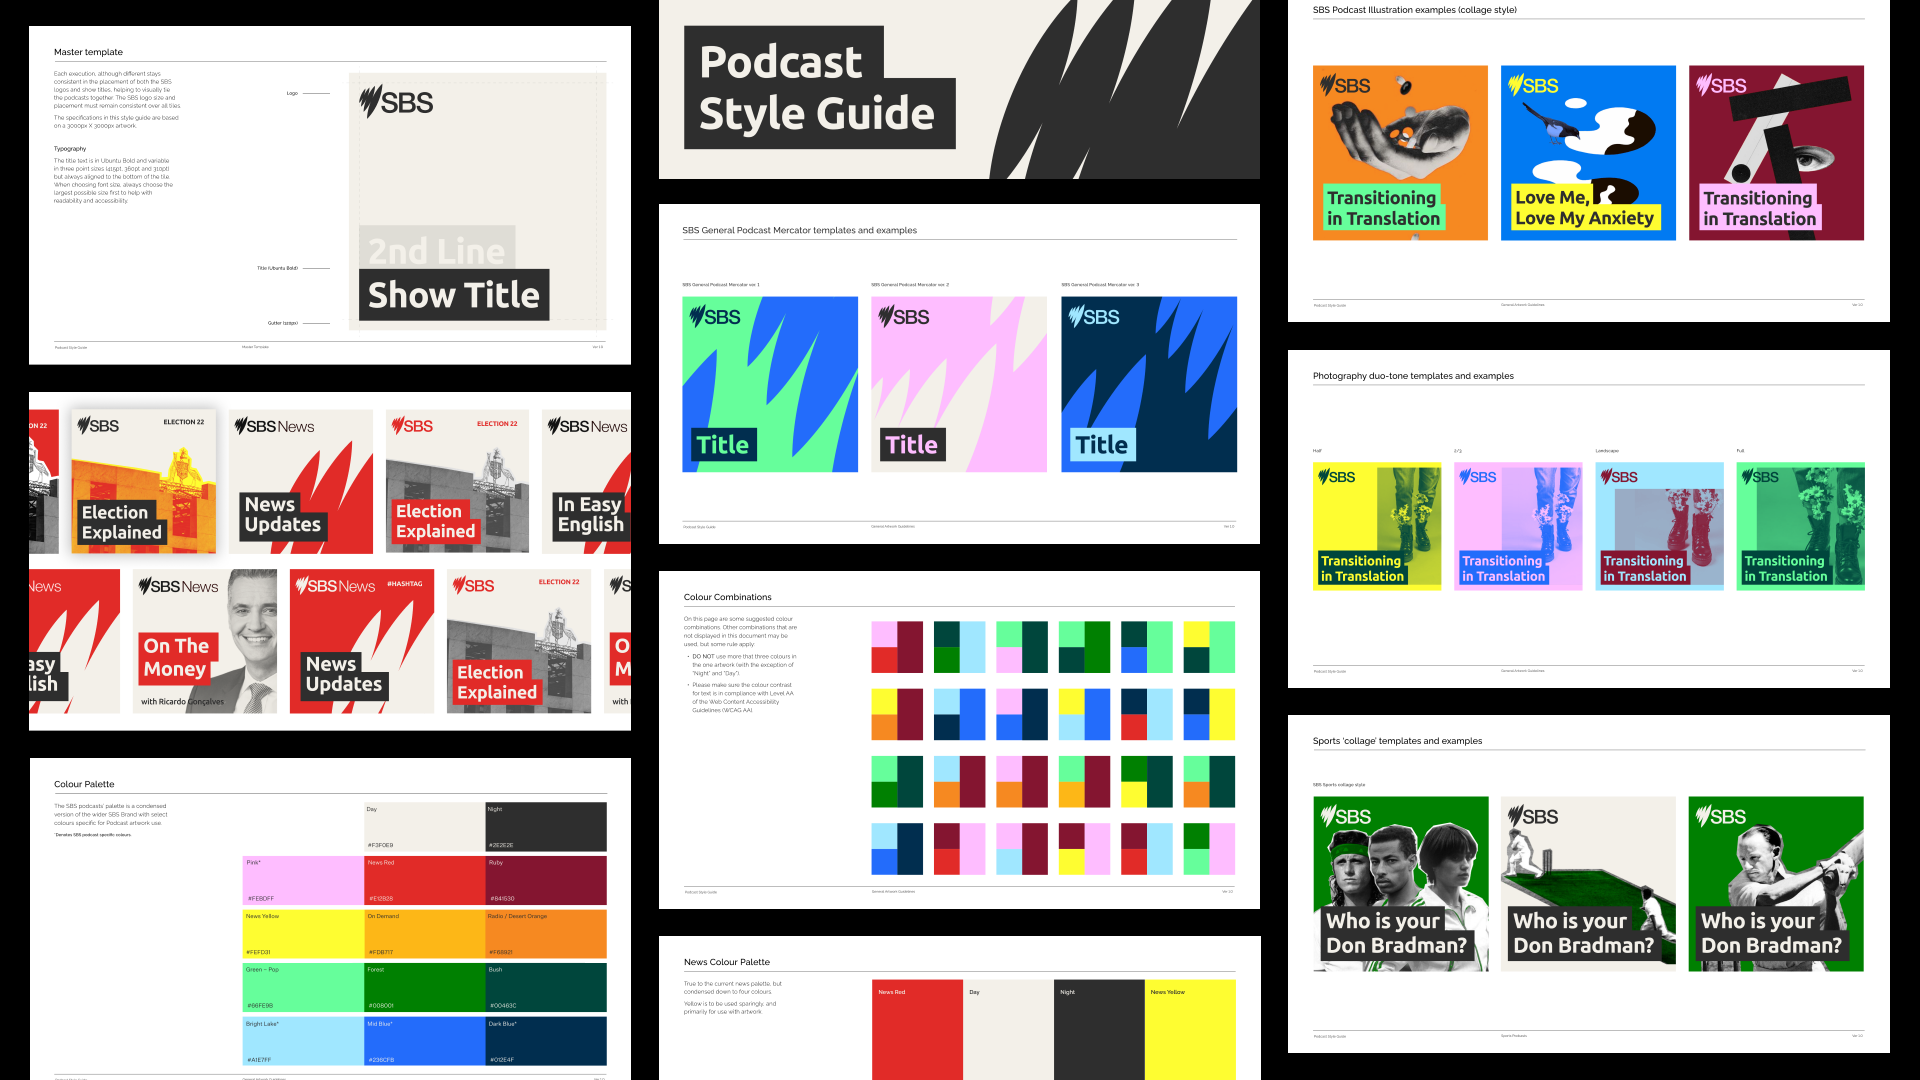 Pages from the SBS podcast styleguide